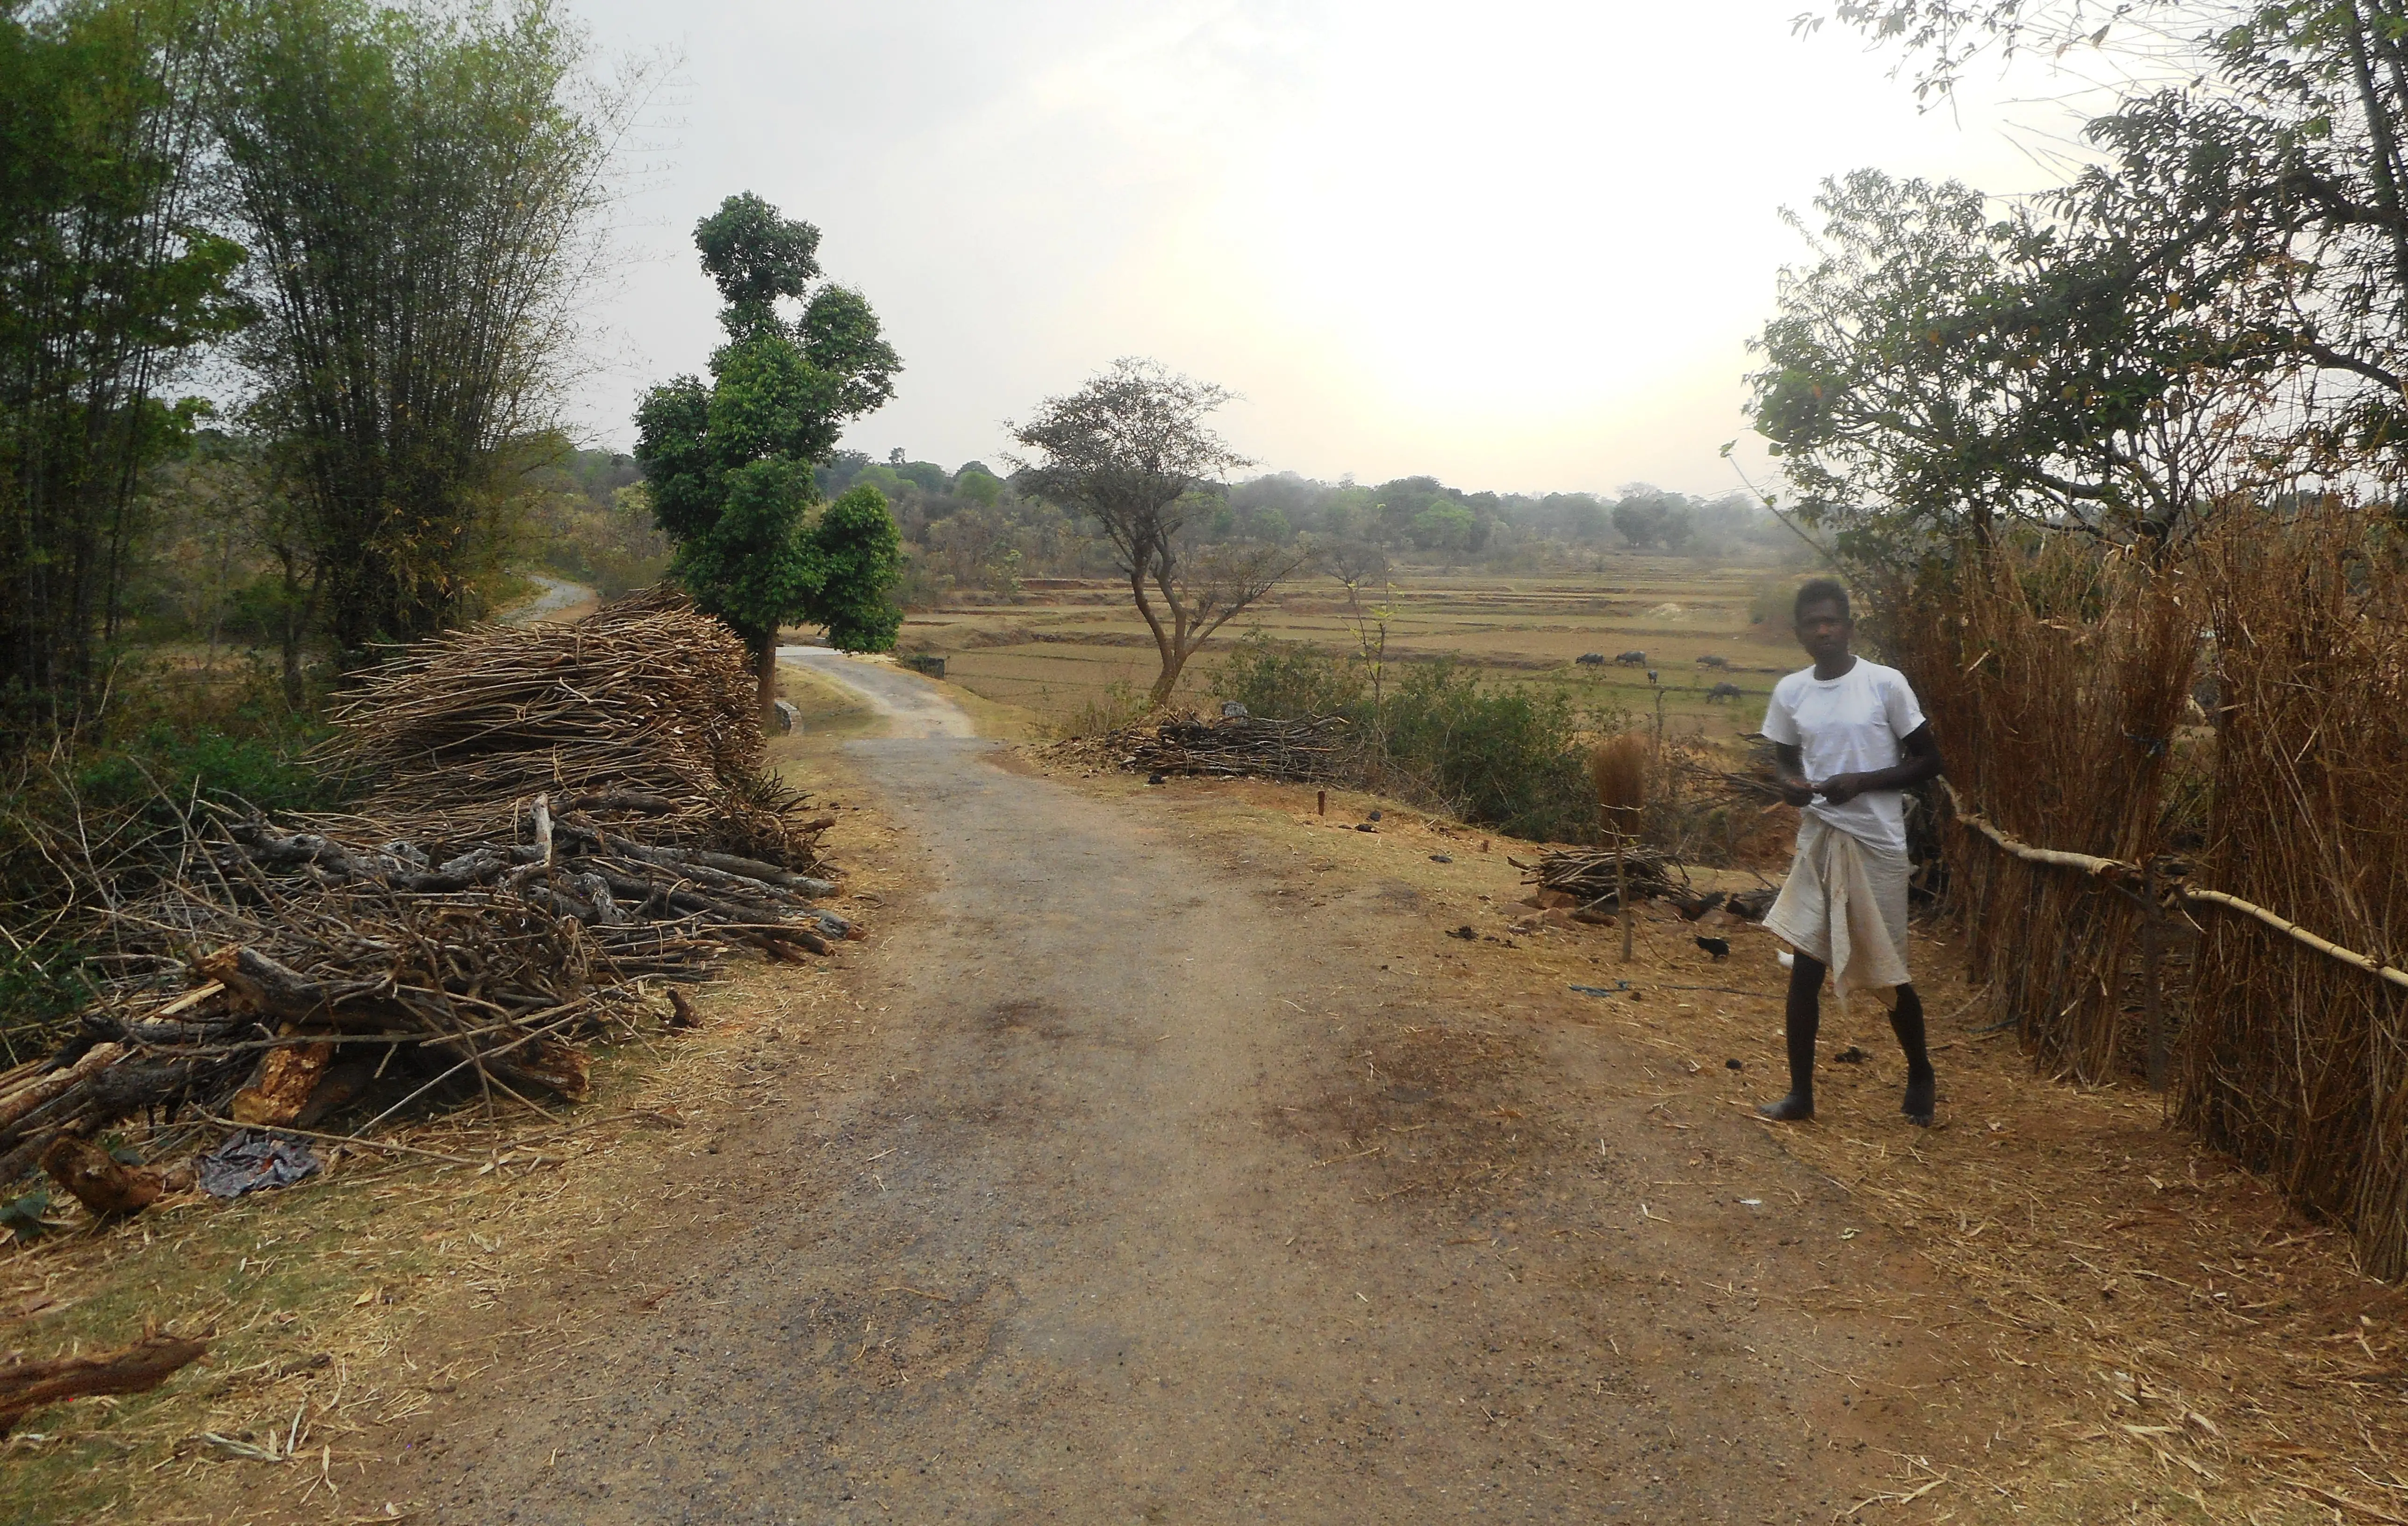 A man stands on the side of village road